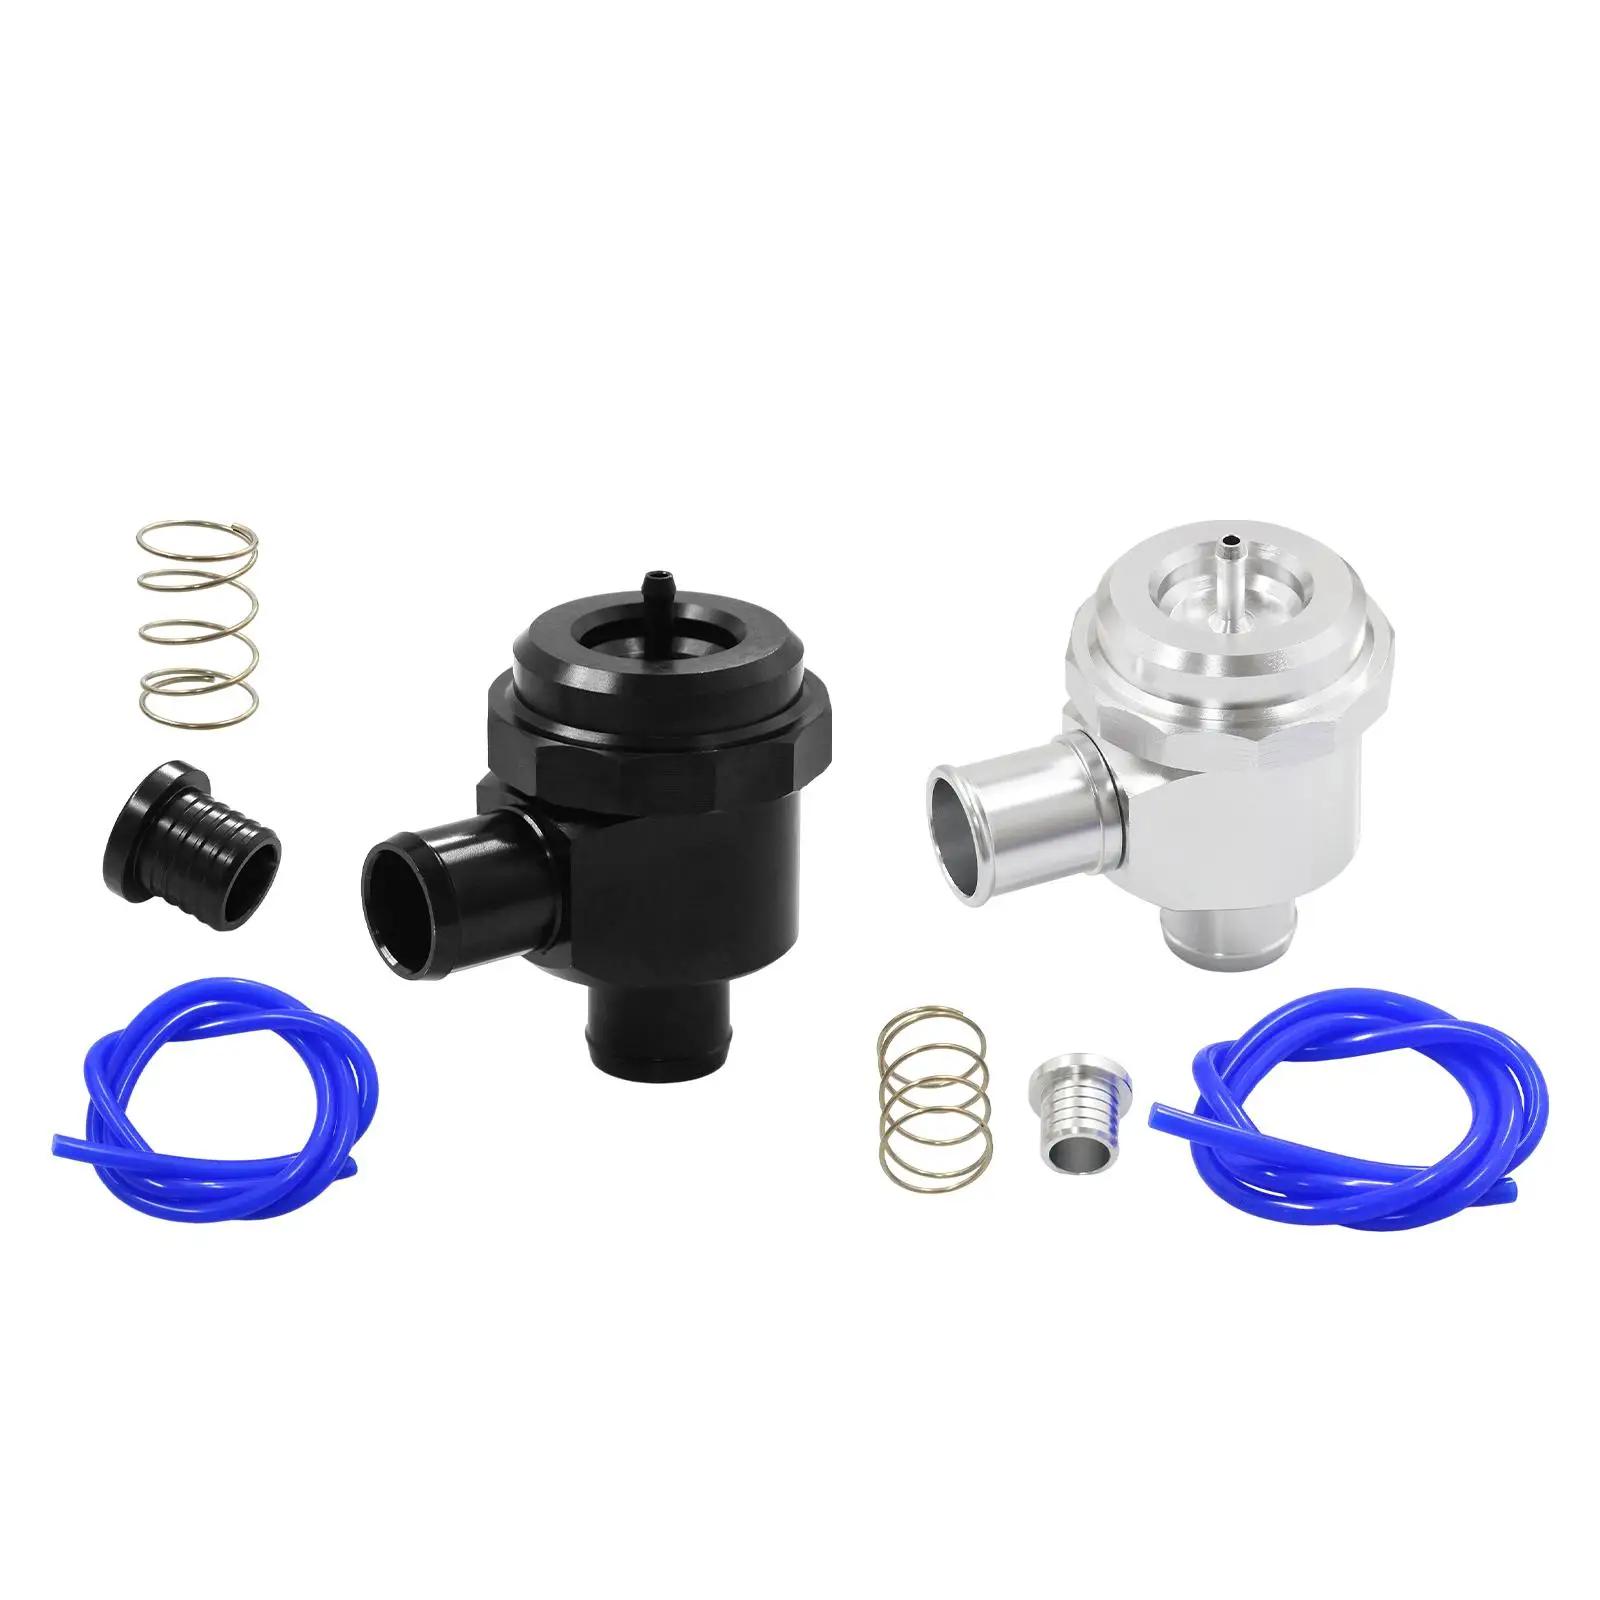 Diverter Blow Off Valve Simple to Use Professional for Car Replacement